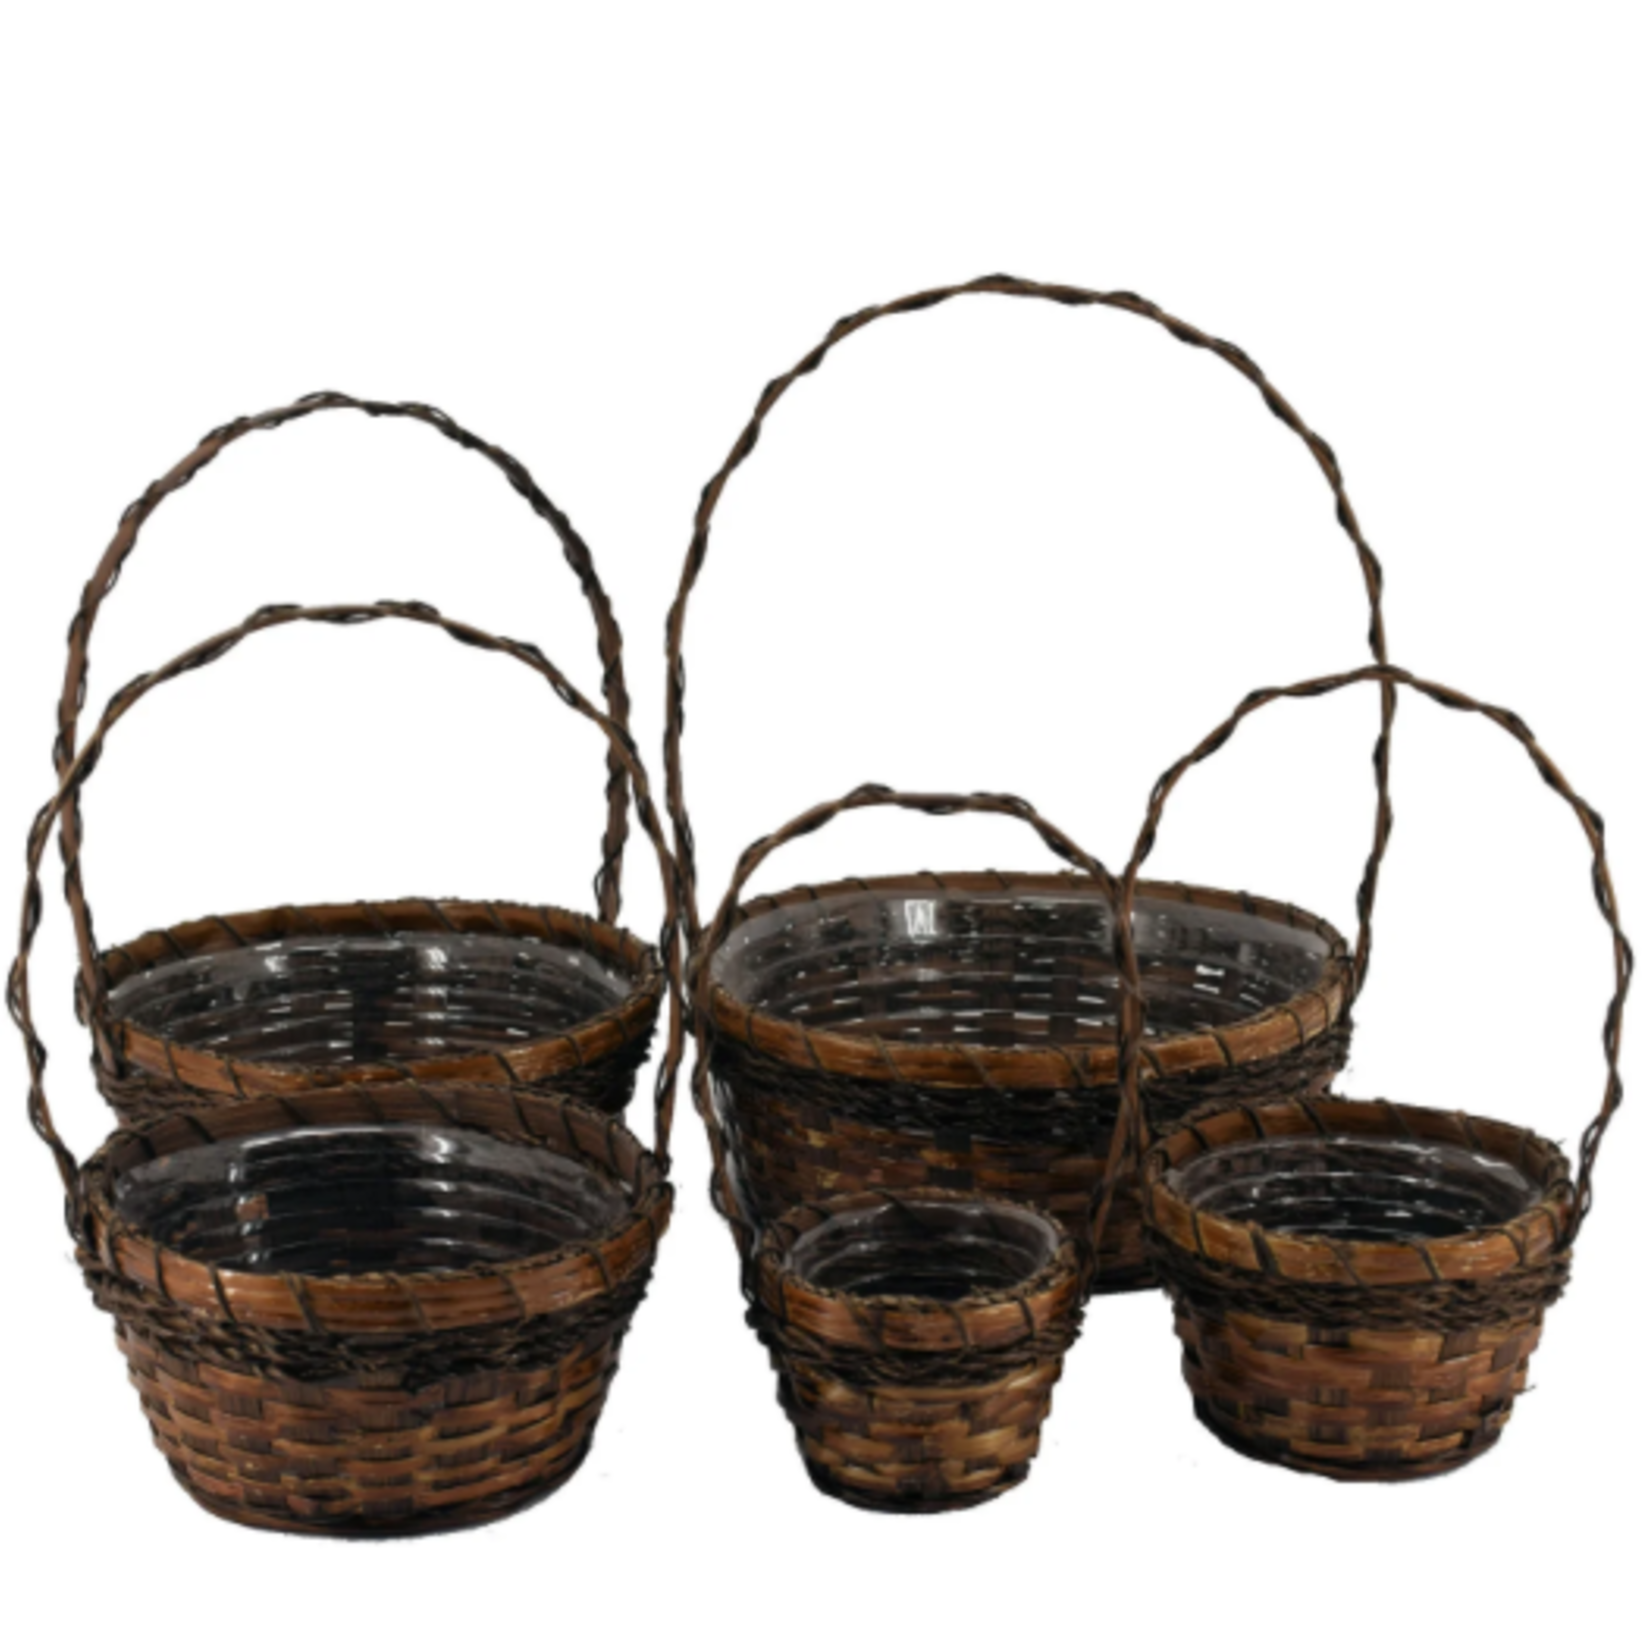 SET OF 5 STAINED WOOD RUSTIC BASKETS